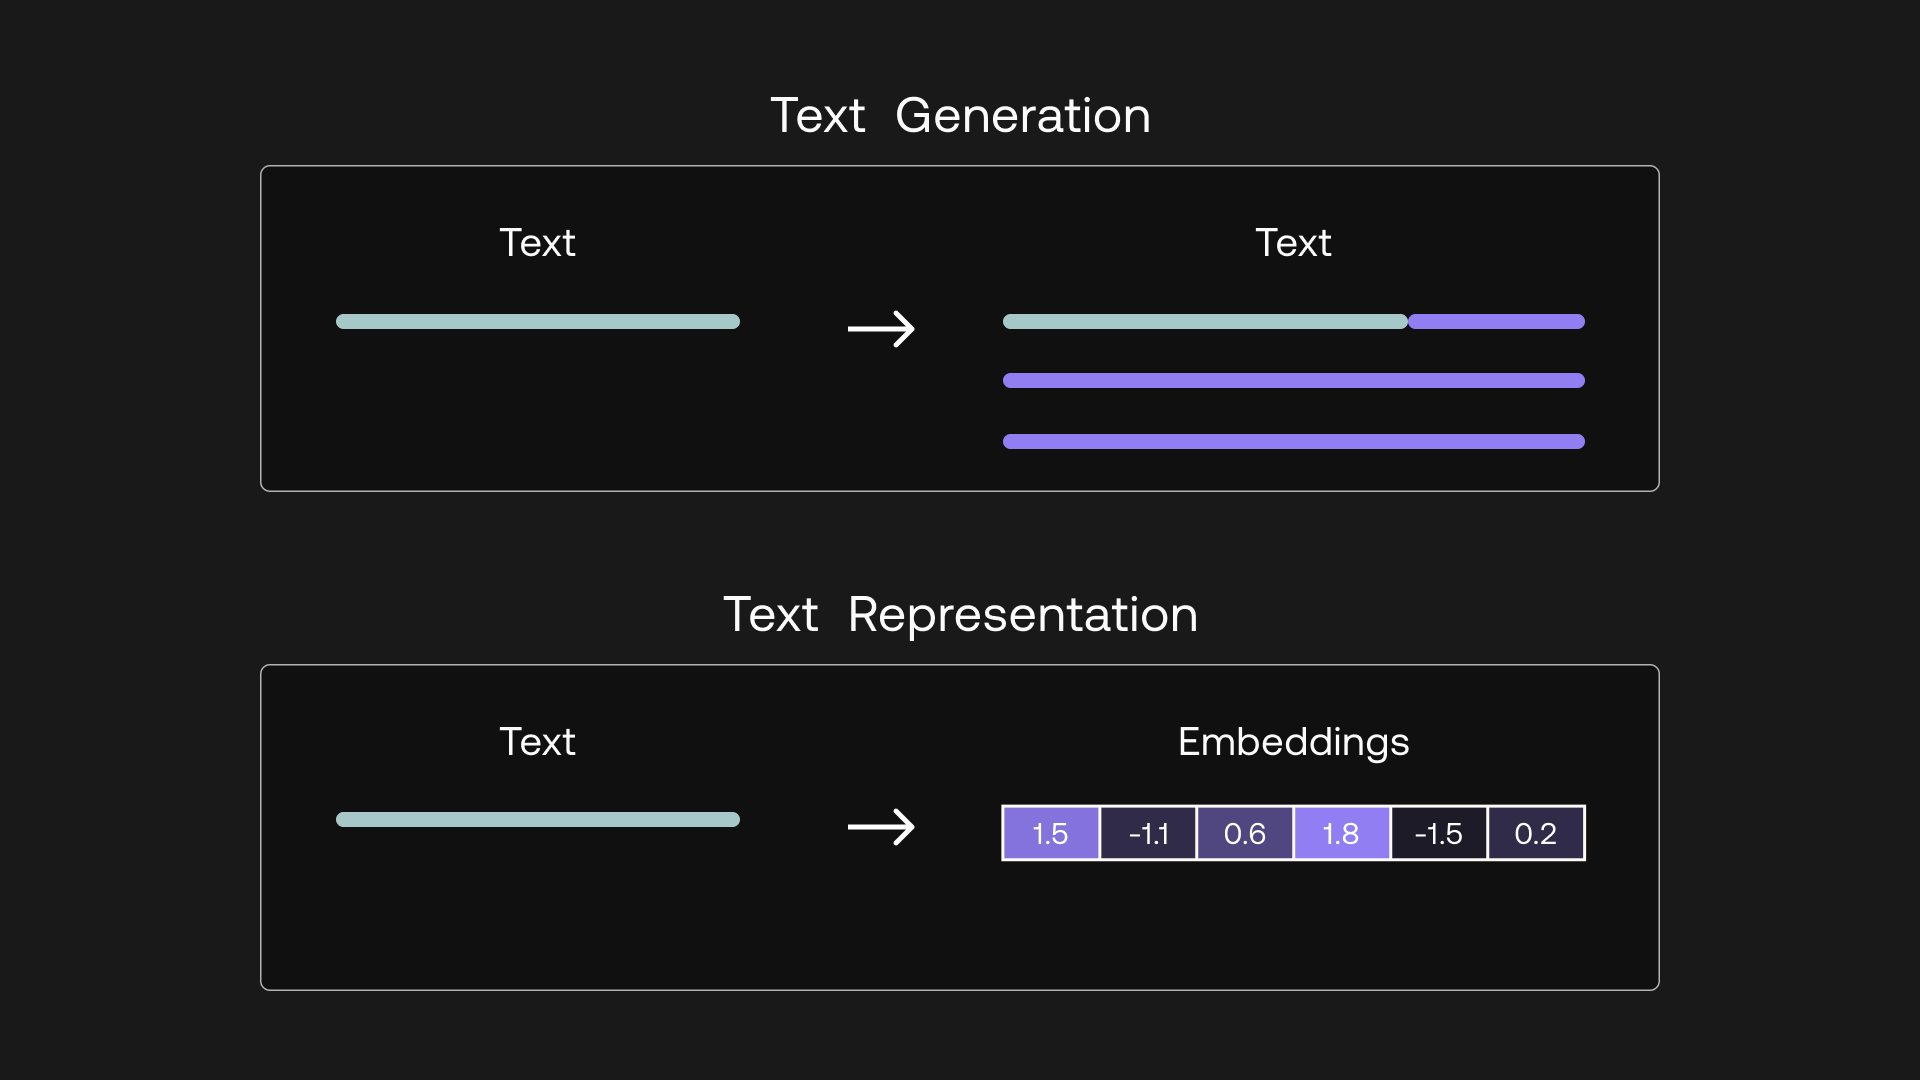 Text generation outputs text, while text representation outputs embeddings